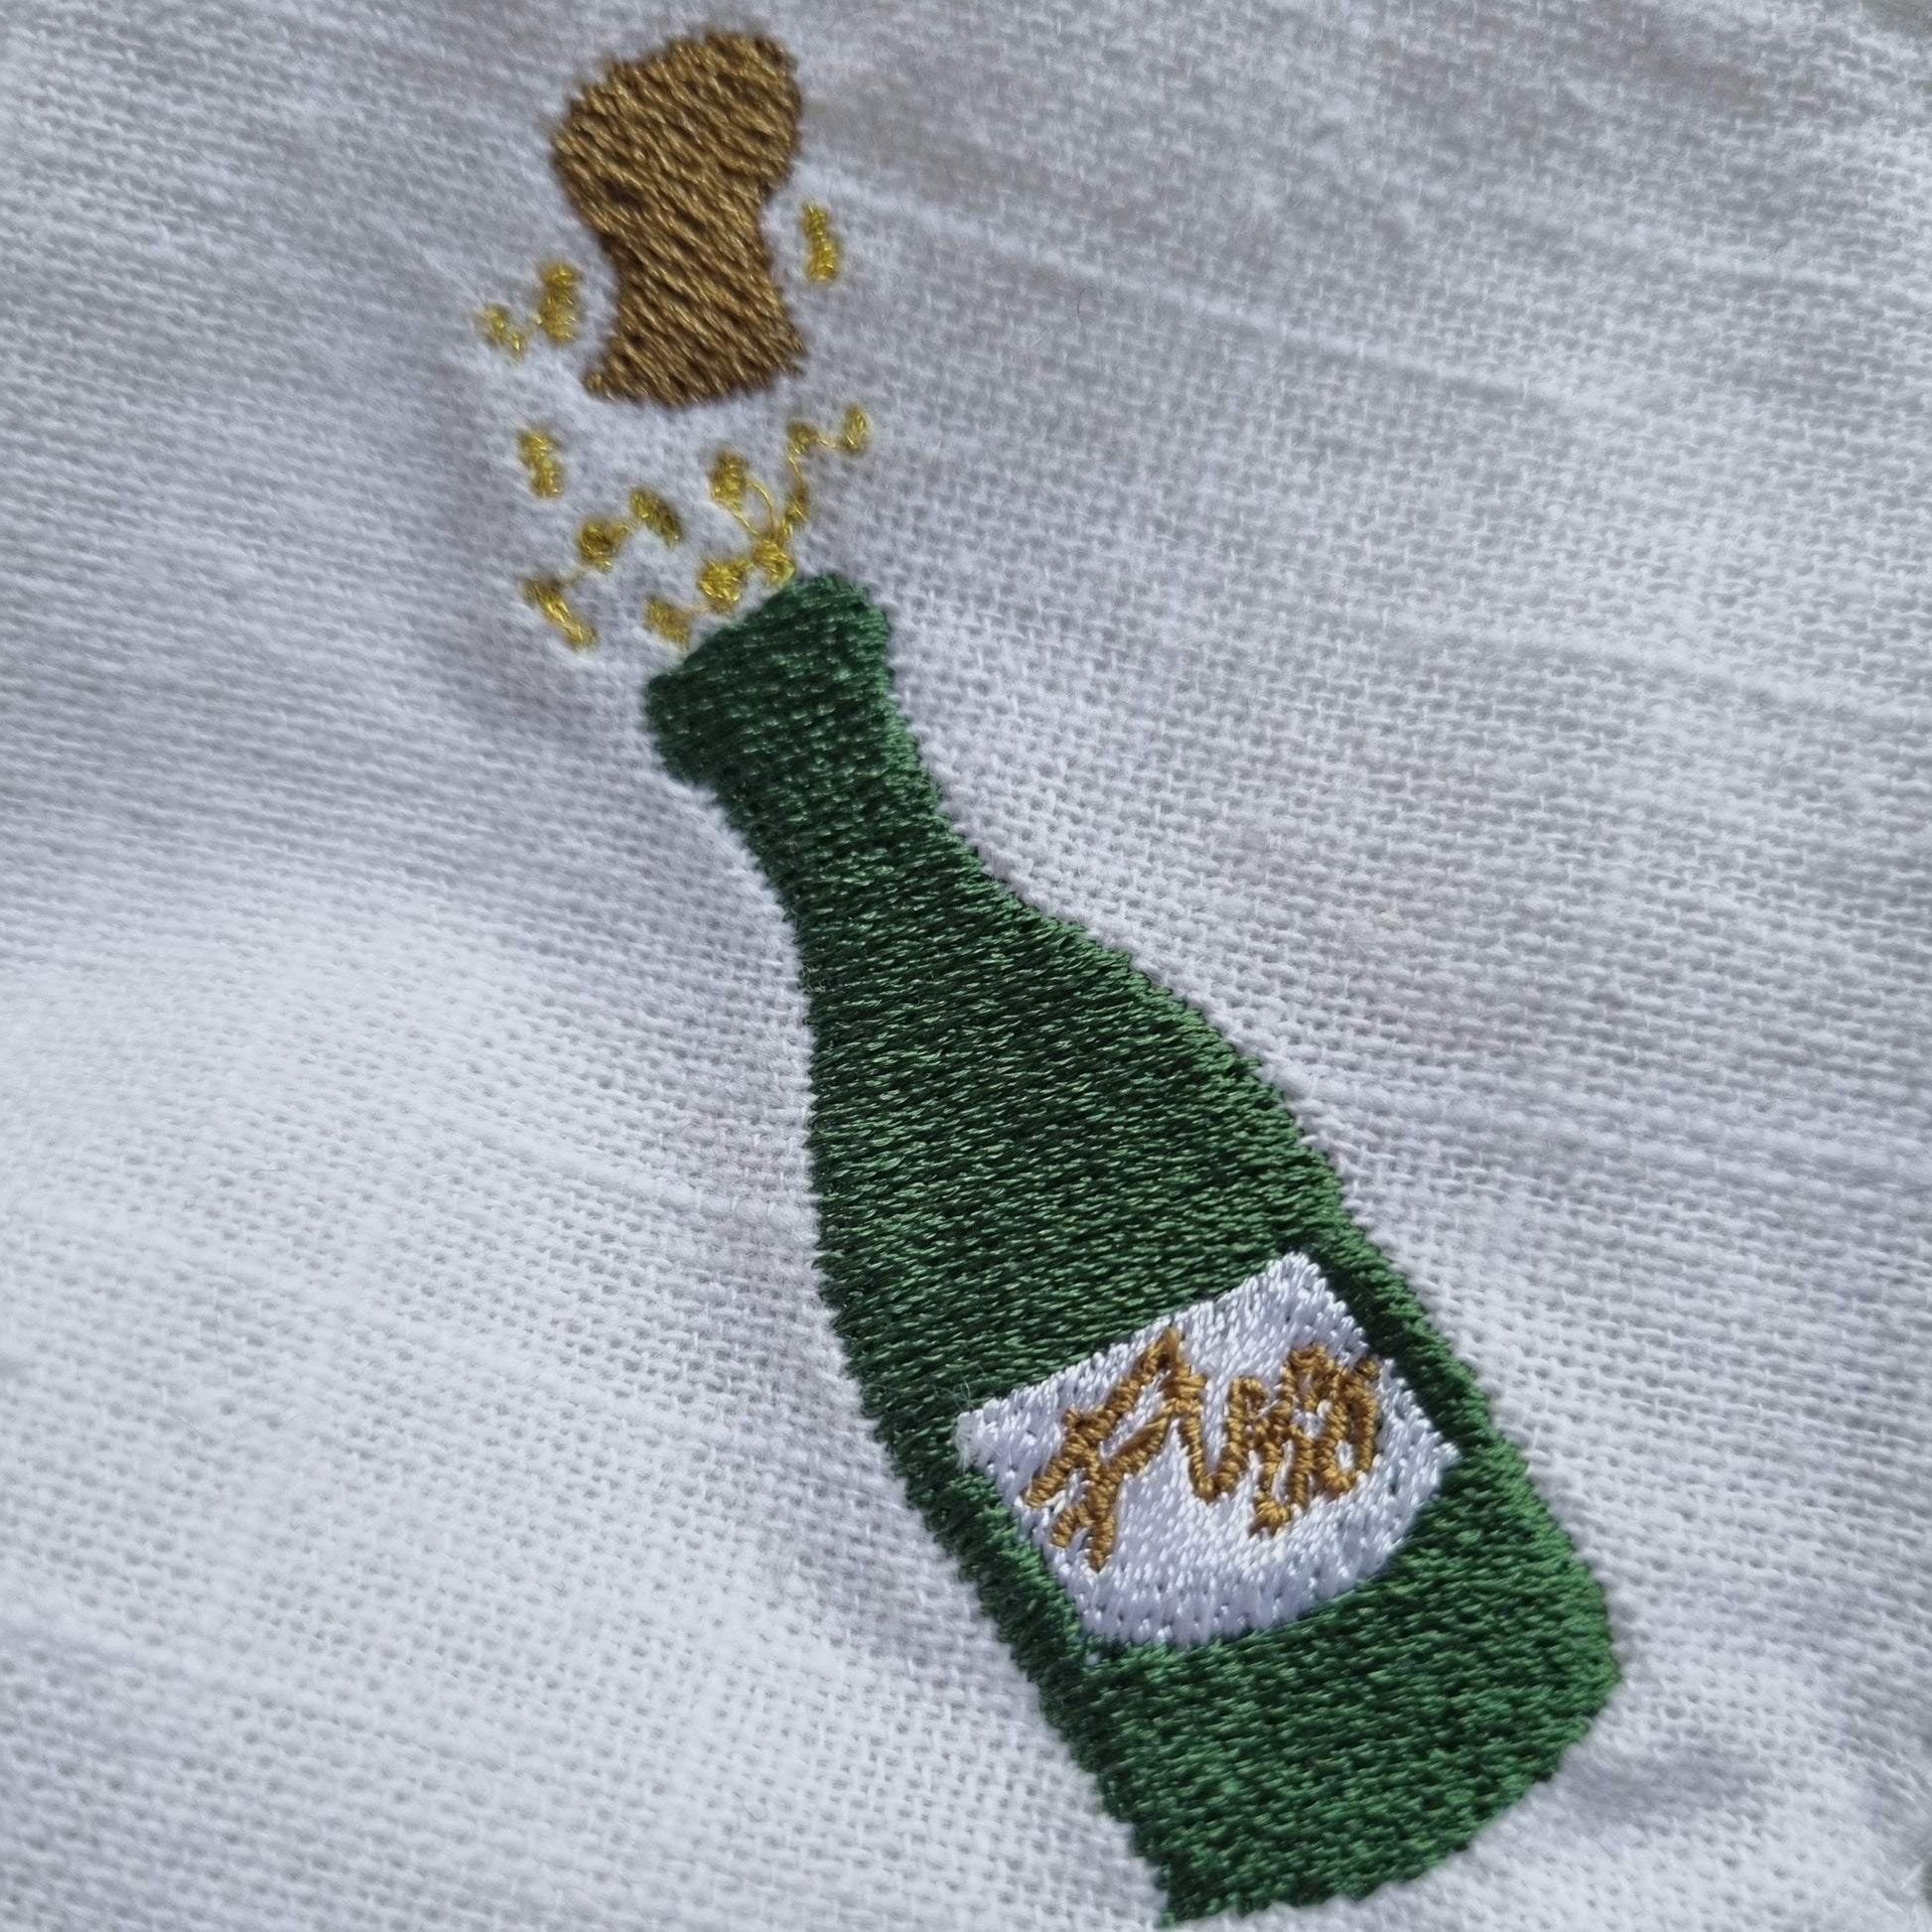 an embroidered champagne bottle on a white napkin